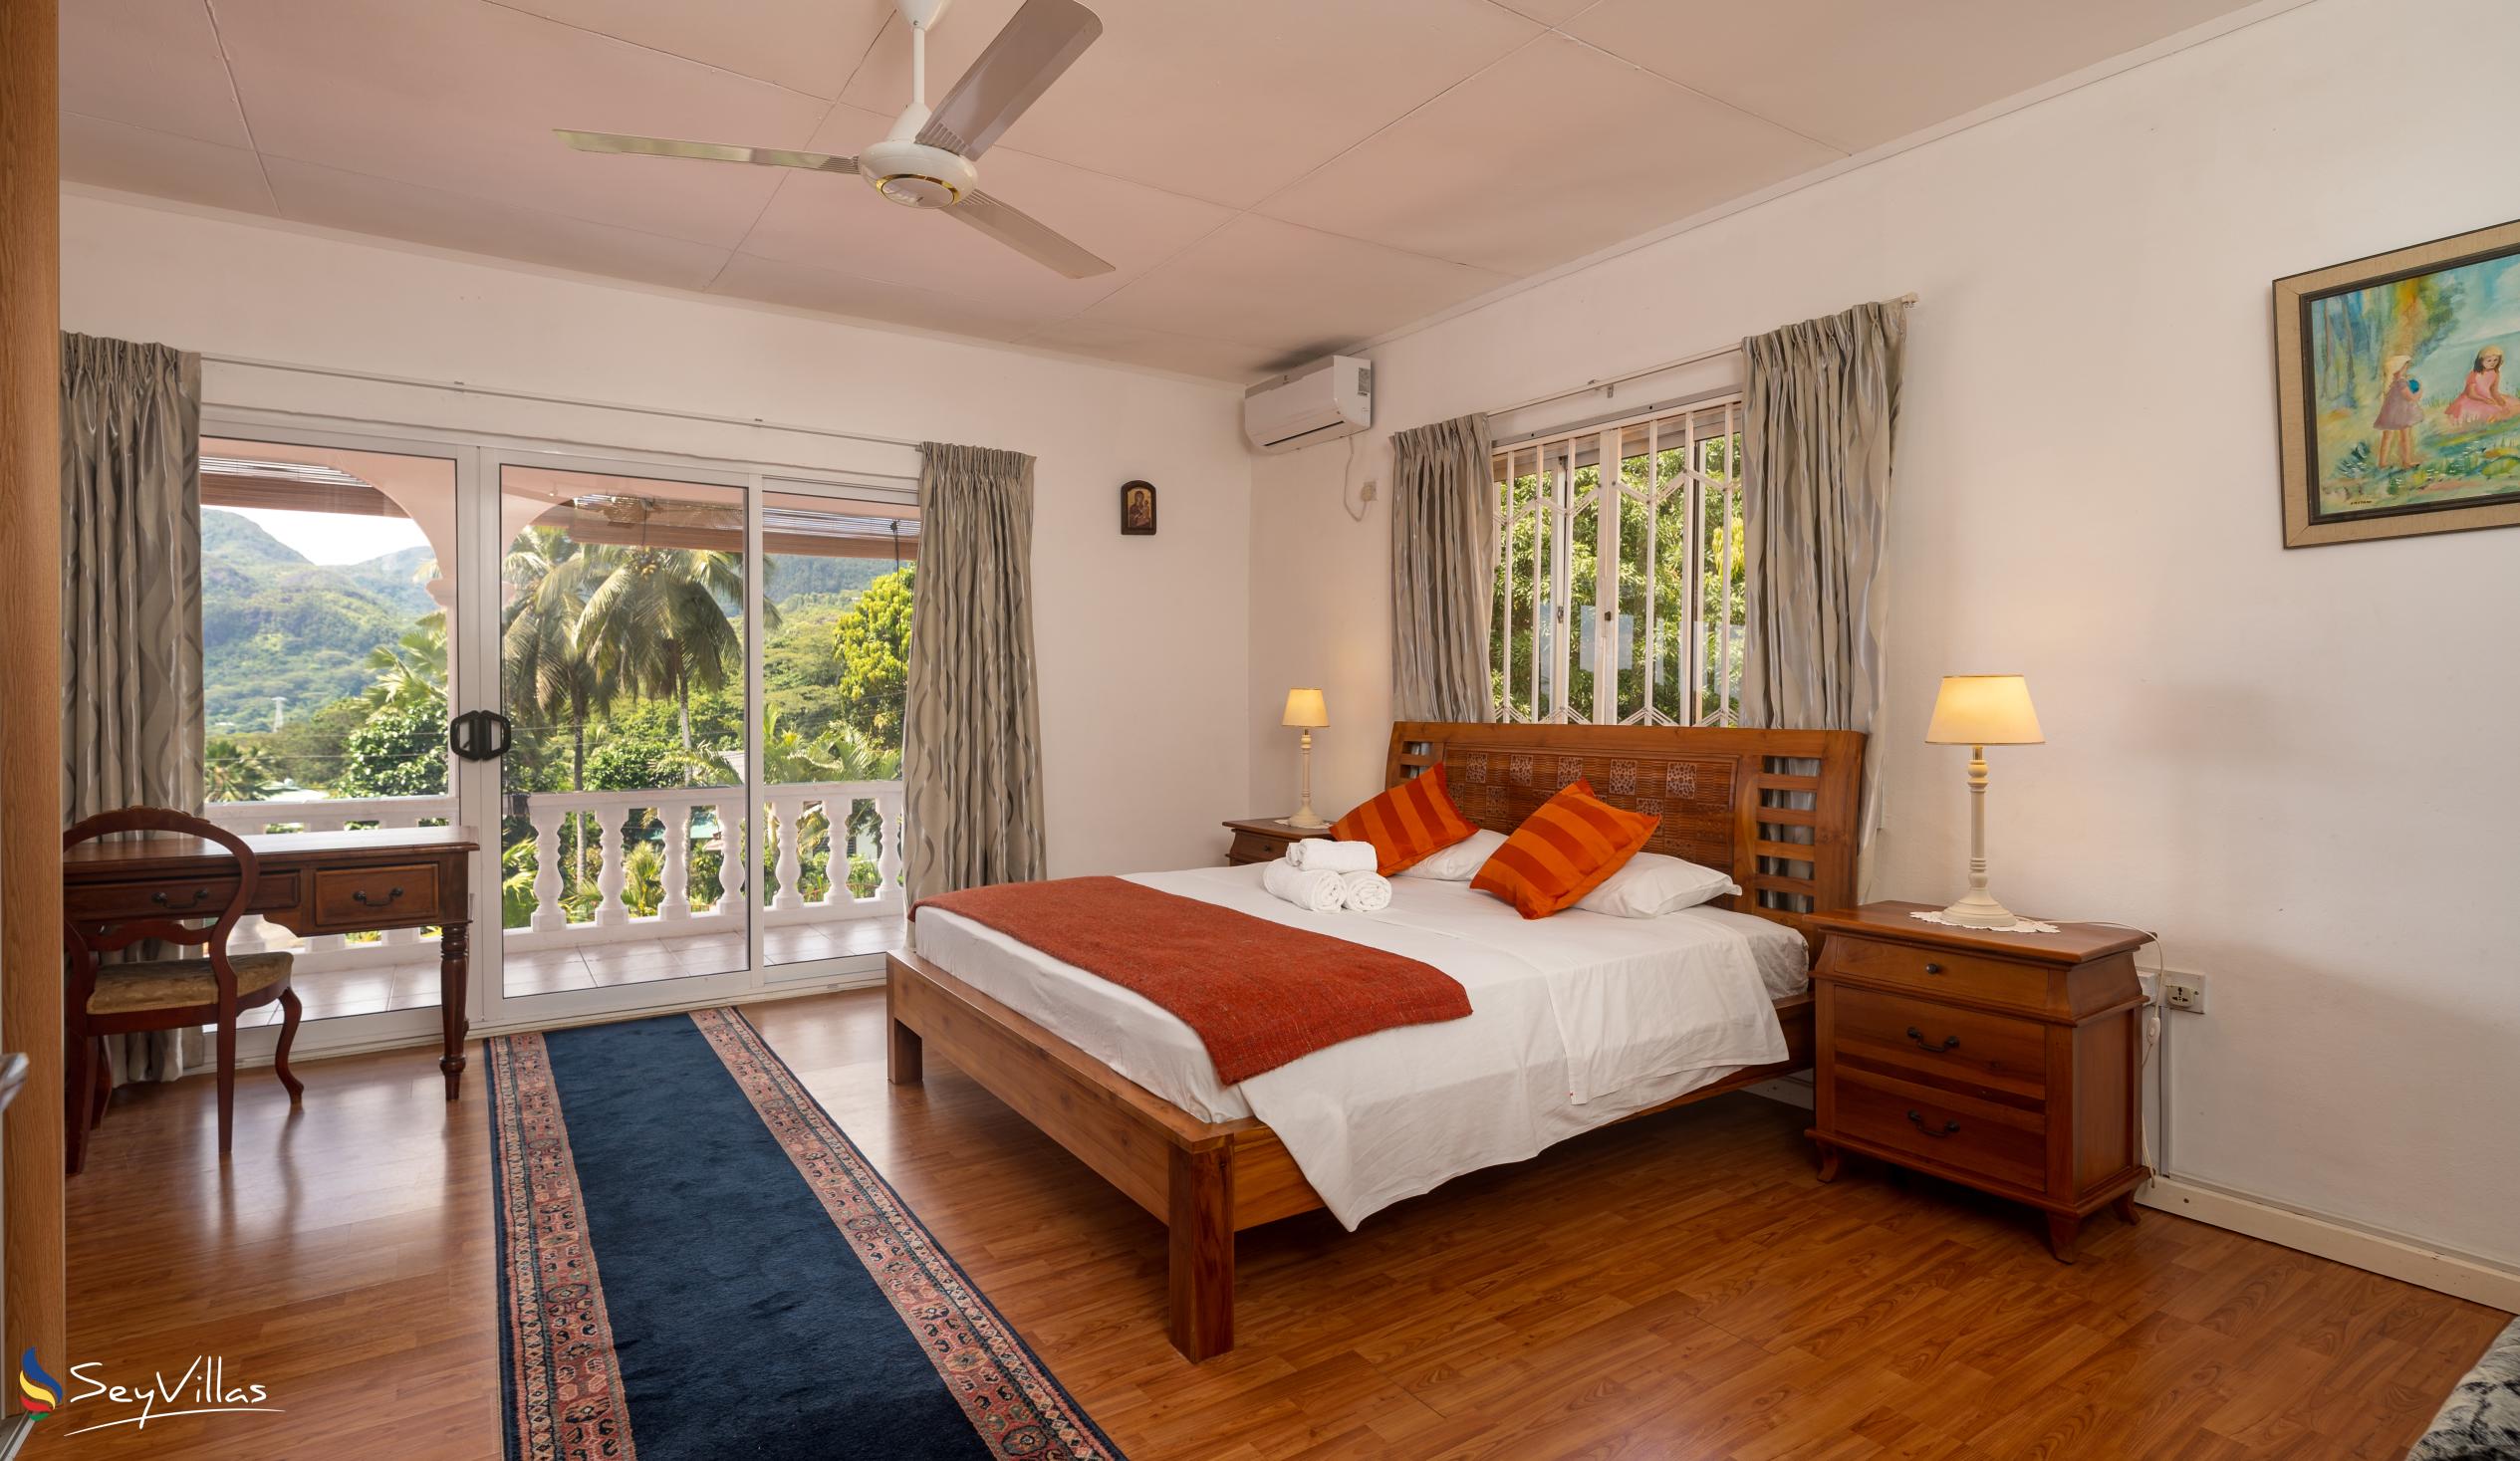 Foto 51: The Orchard Holiday Home - Chambre Double Deluxe - Mahé (Seychelles)